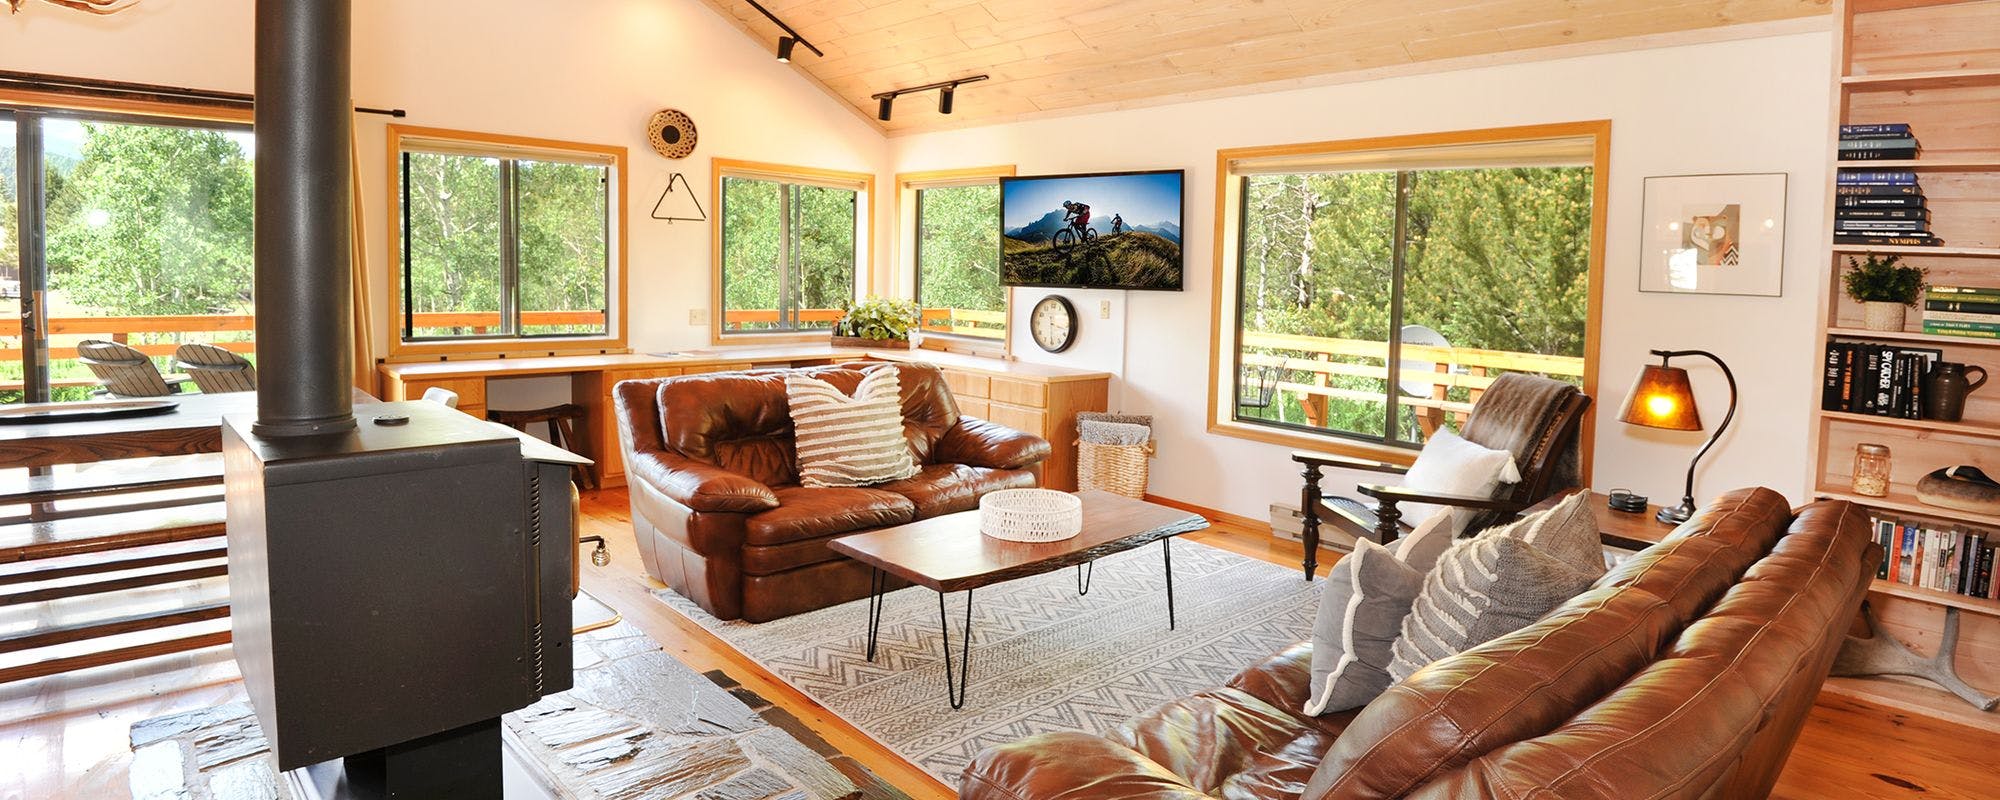 Bright and airy living room in a West Yellowstone, MT vacation rental.